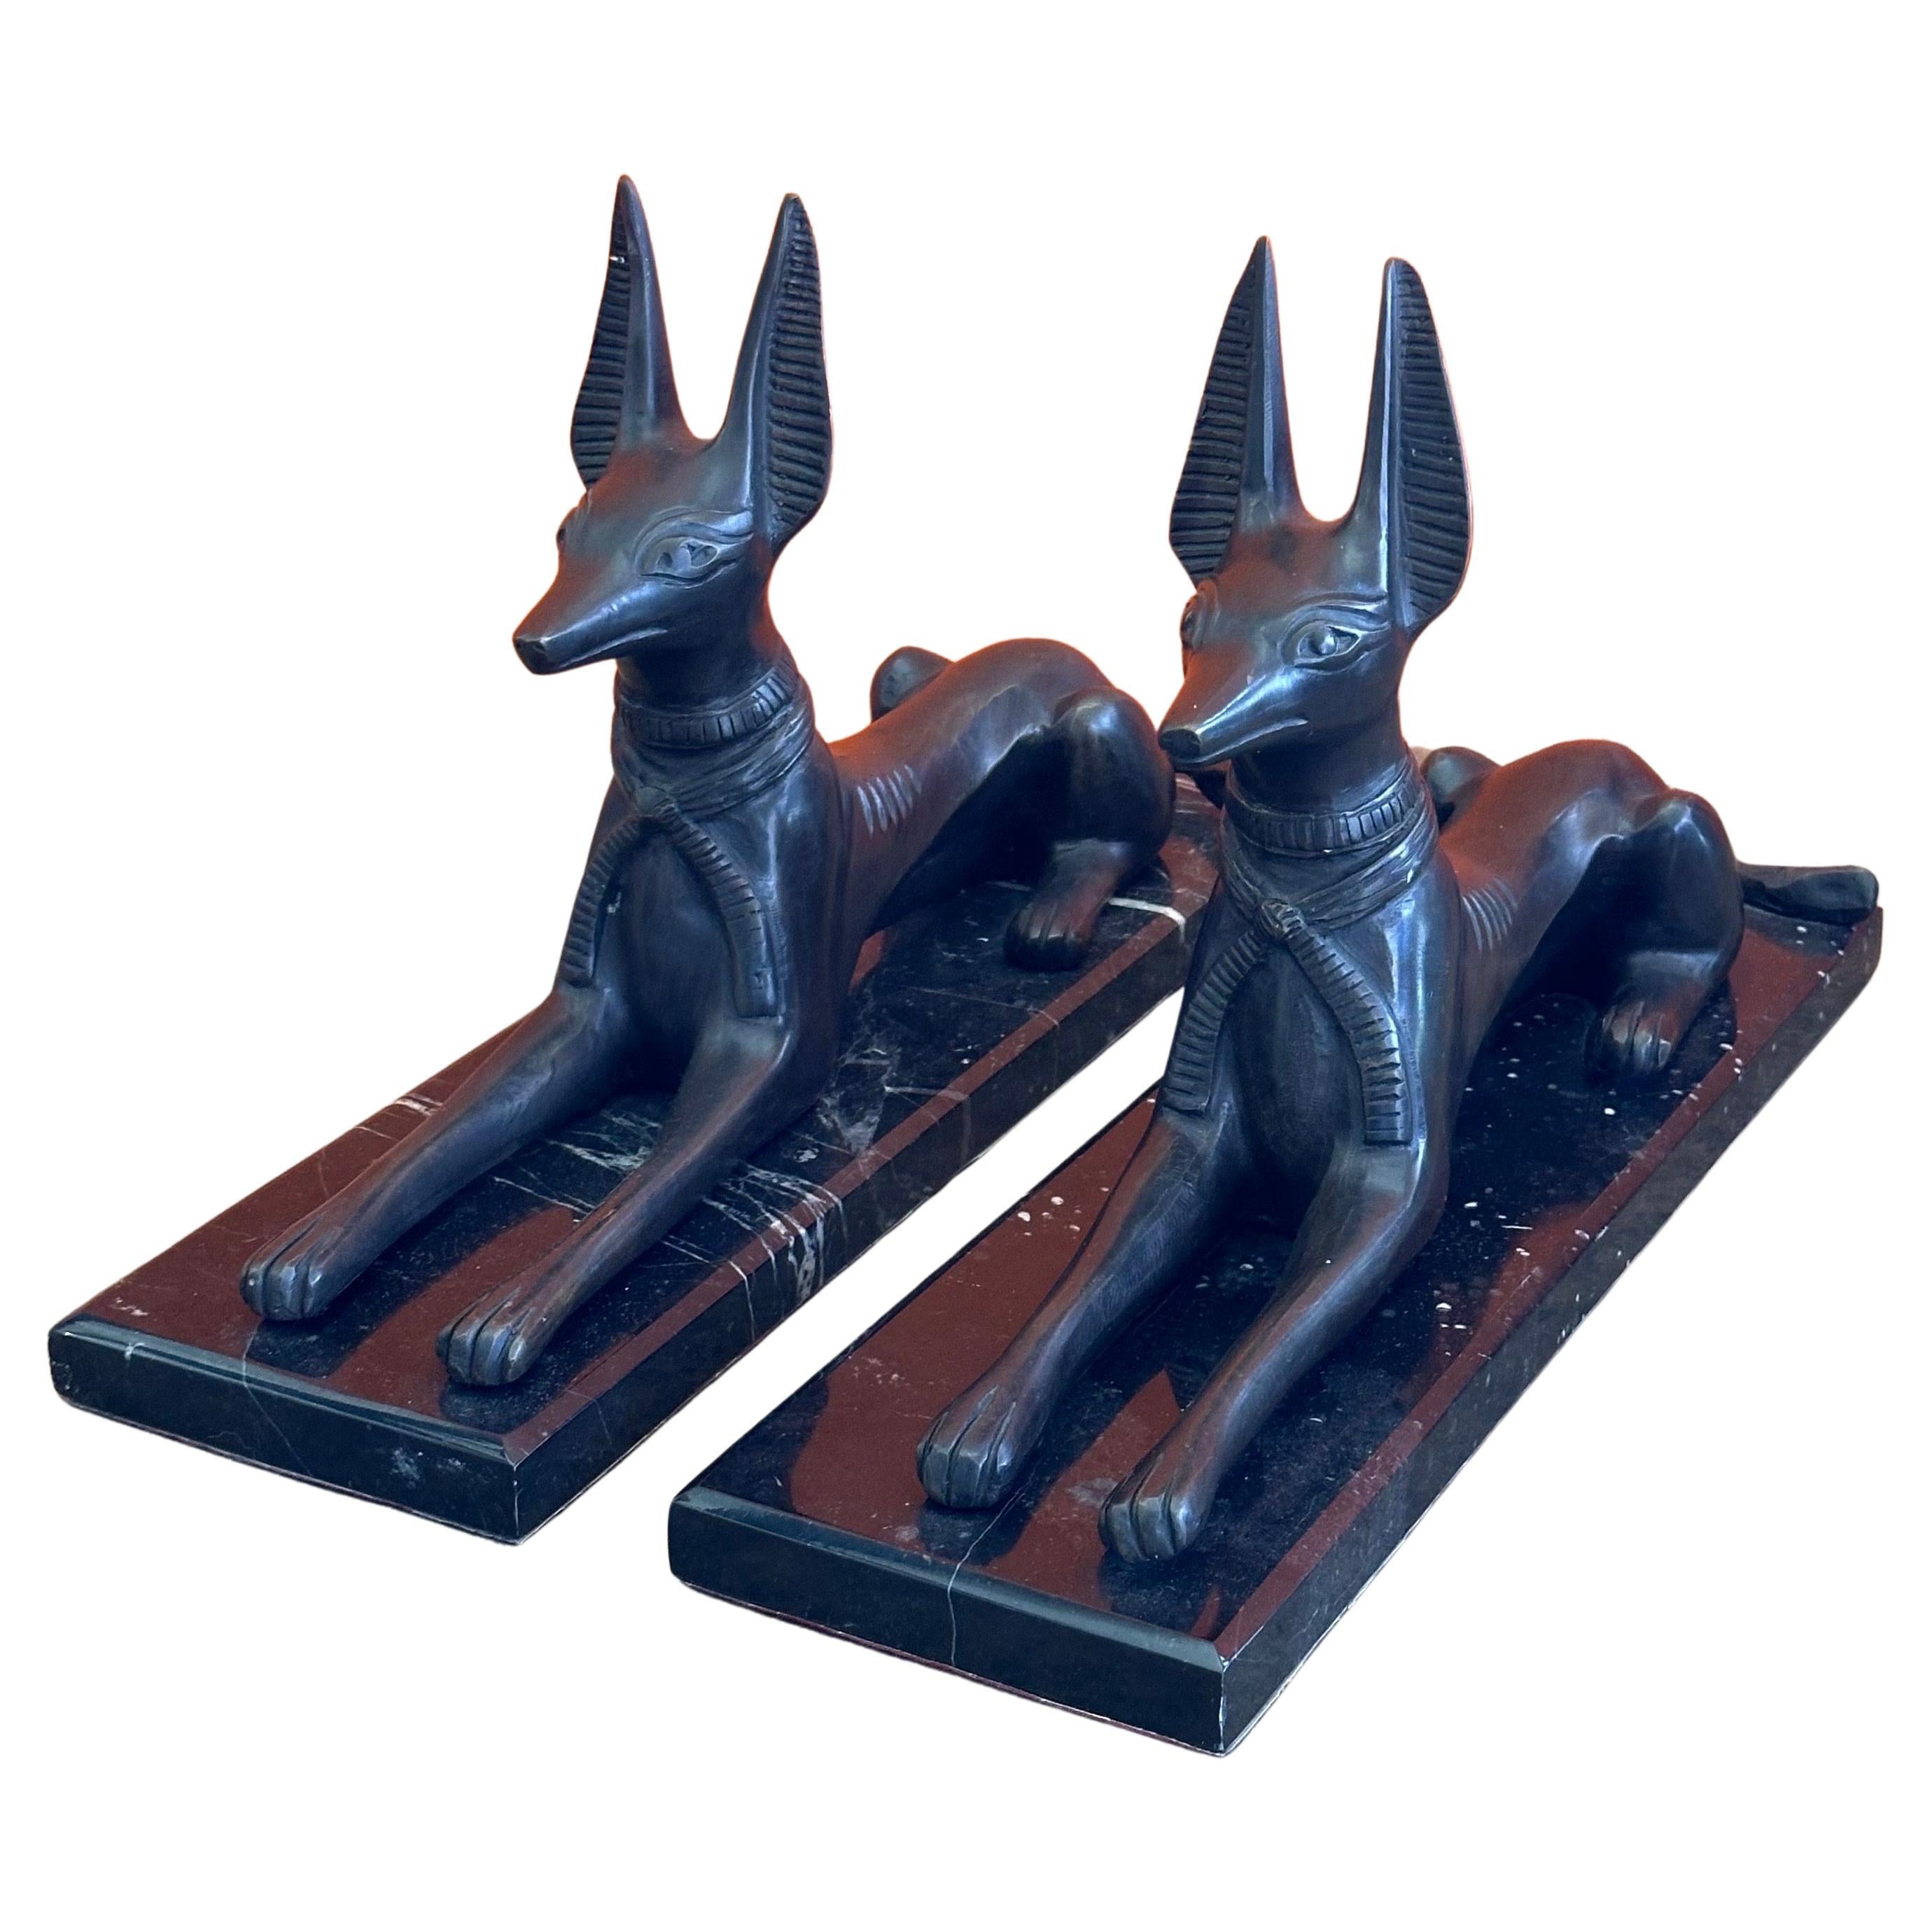 Pair of Egyptian Style Bronze Greyhounds on Marble Bases "Anubis"